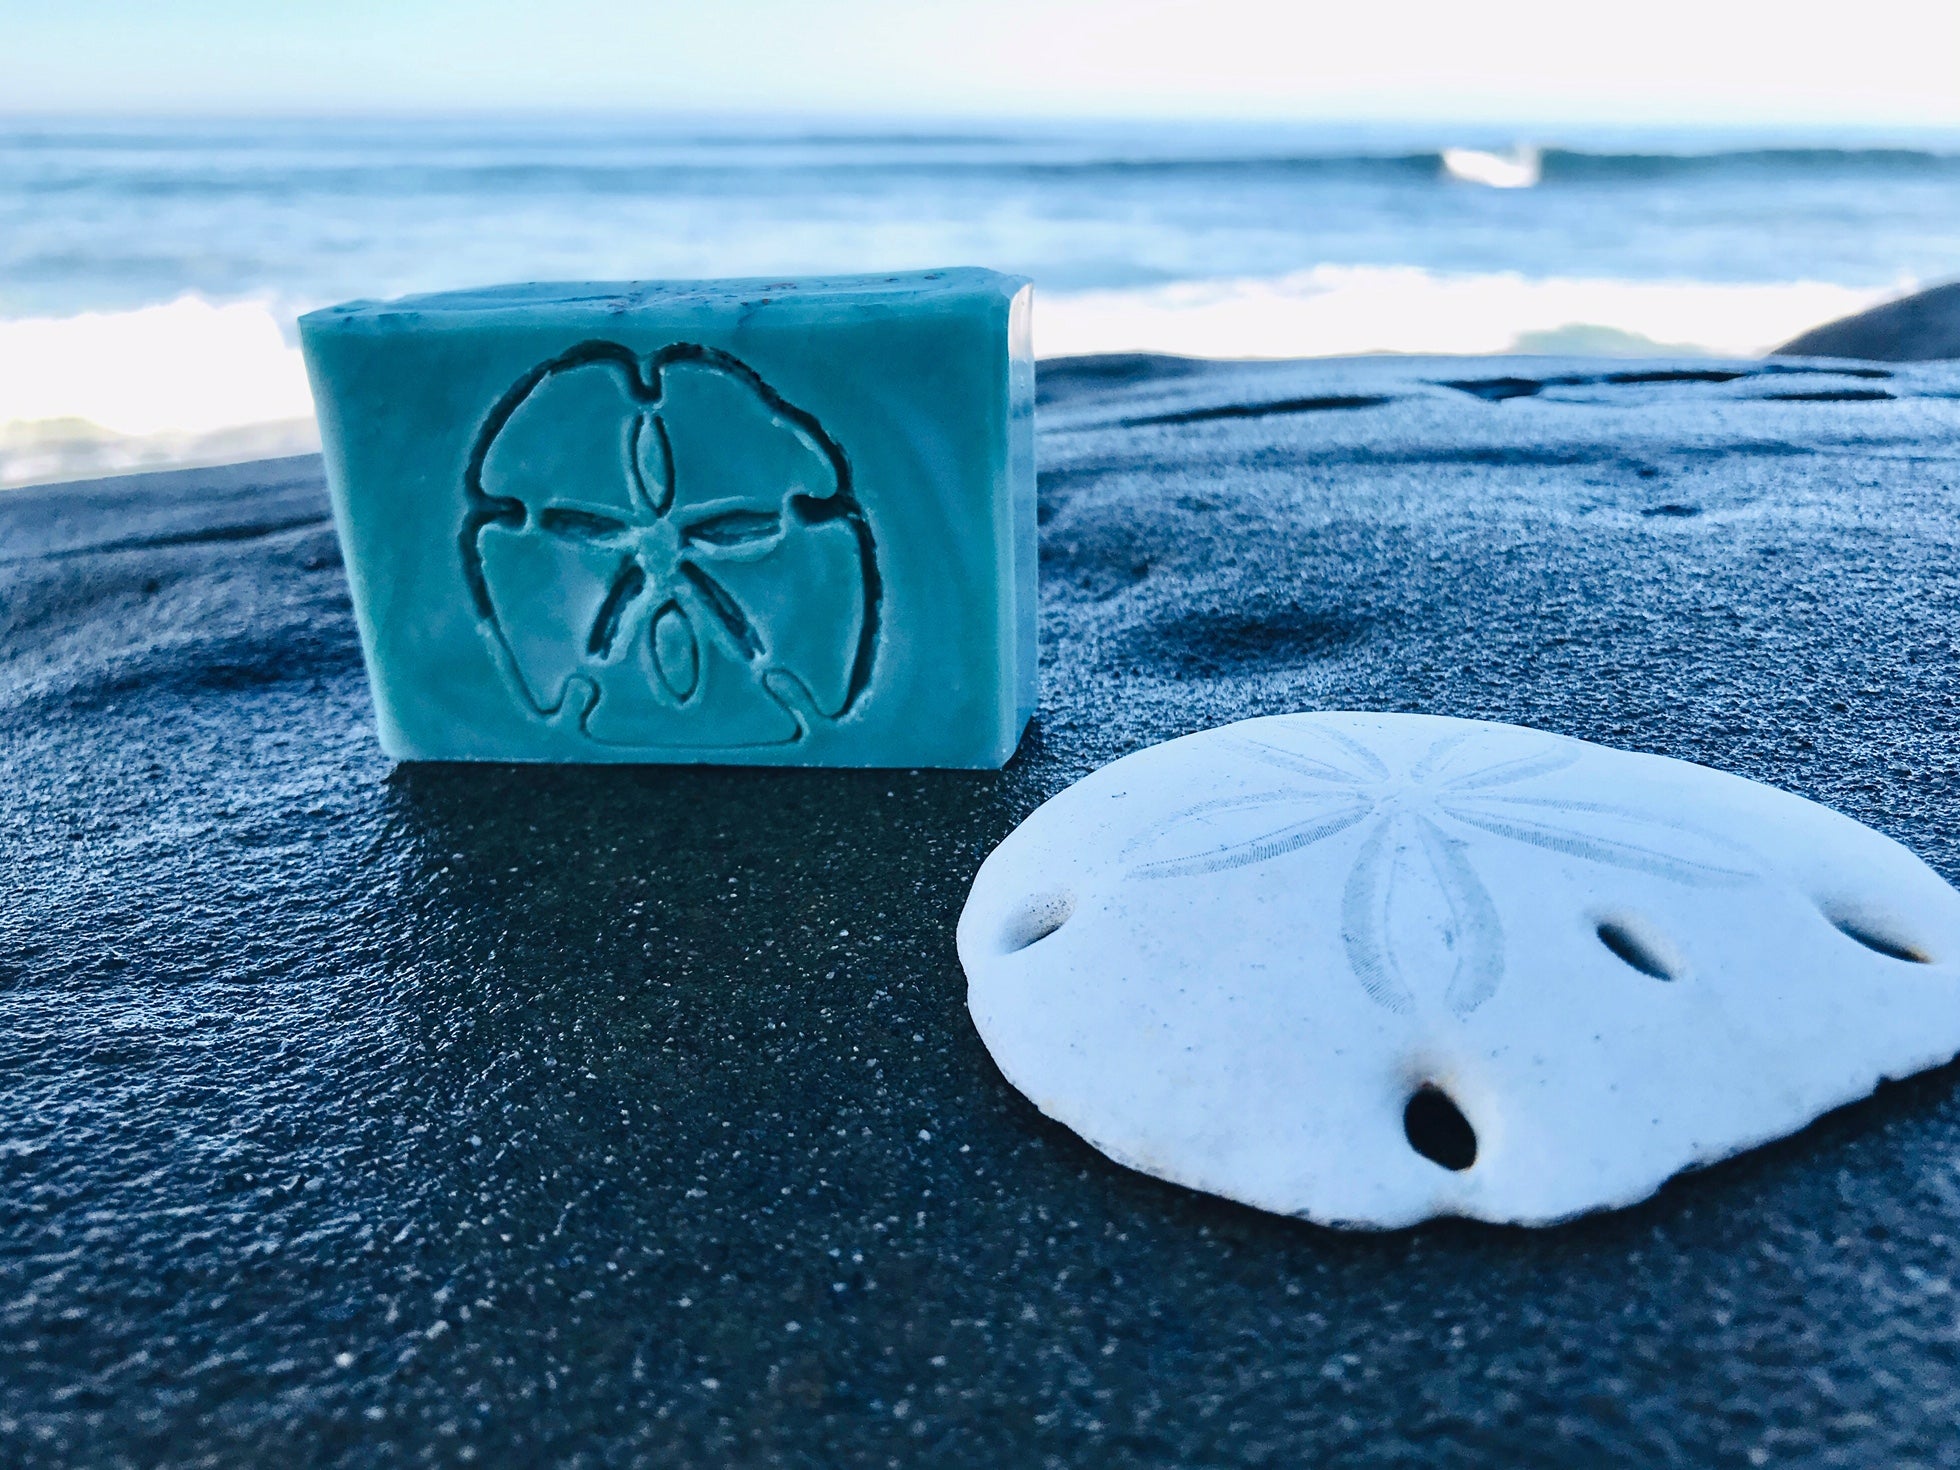 La Jolla Soap Company's Sea Clay Soap. The soap is turquoise blue with a sand dollar carved on the face of the soap. There is a sand dollar laying next to it. The ocean waves are crashing behind them.